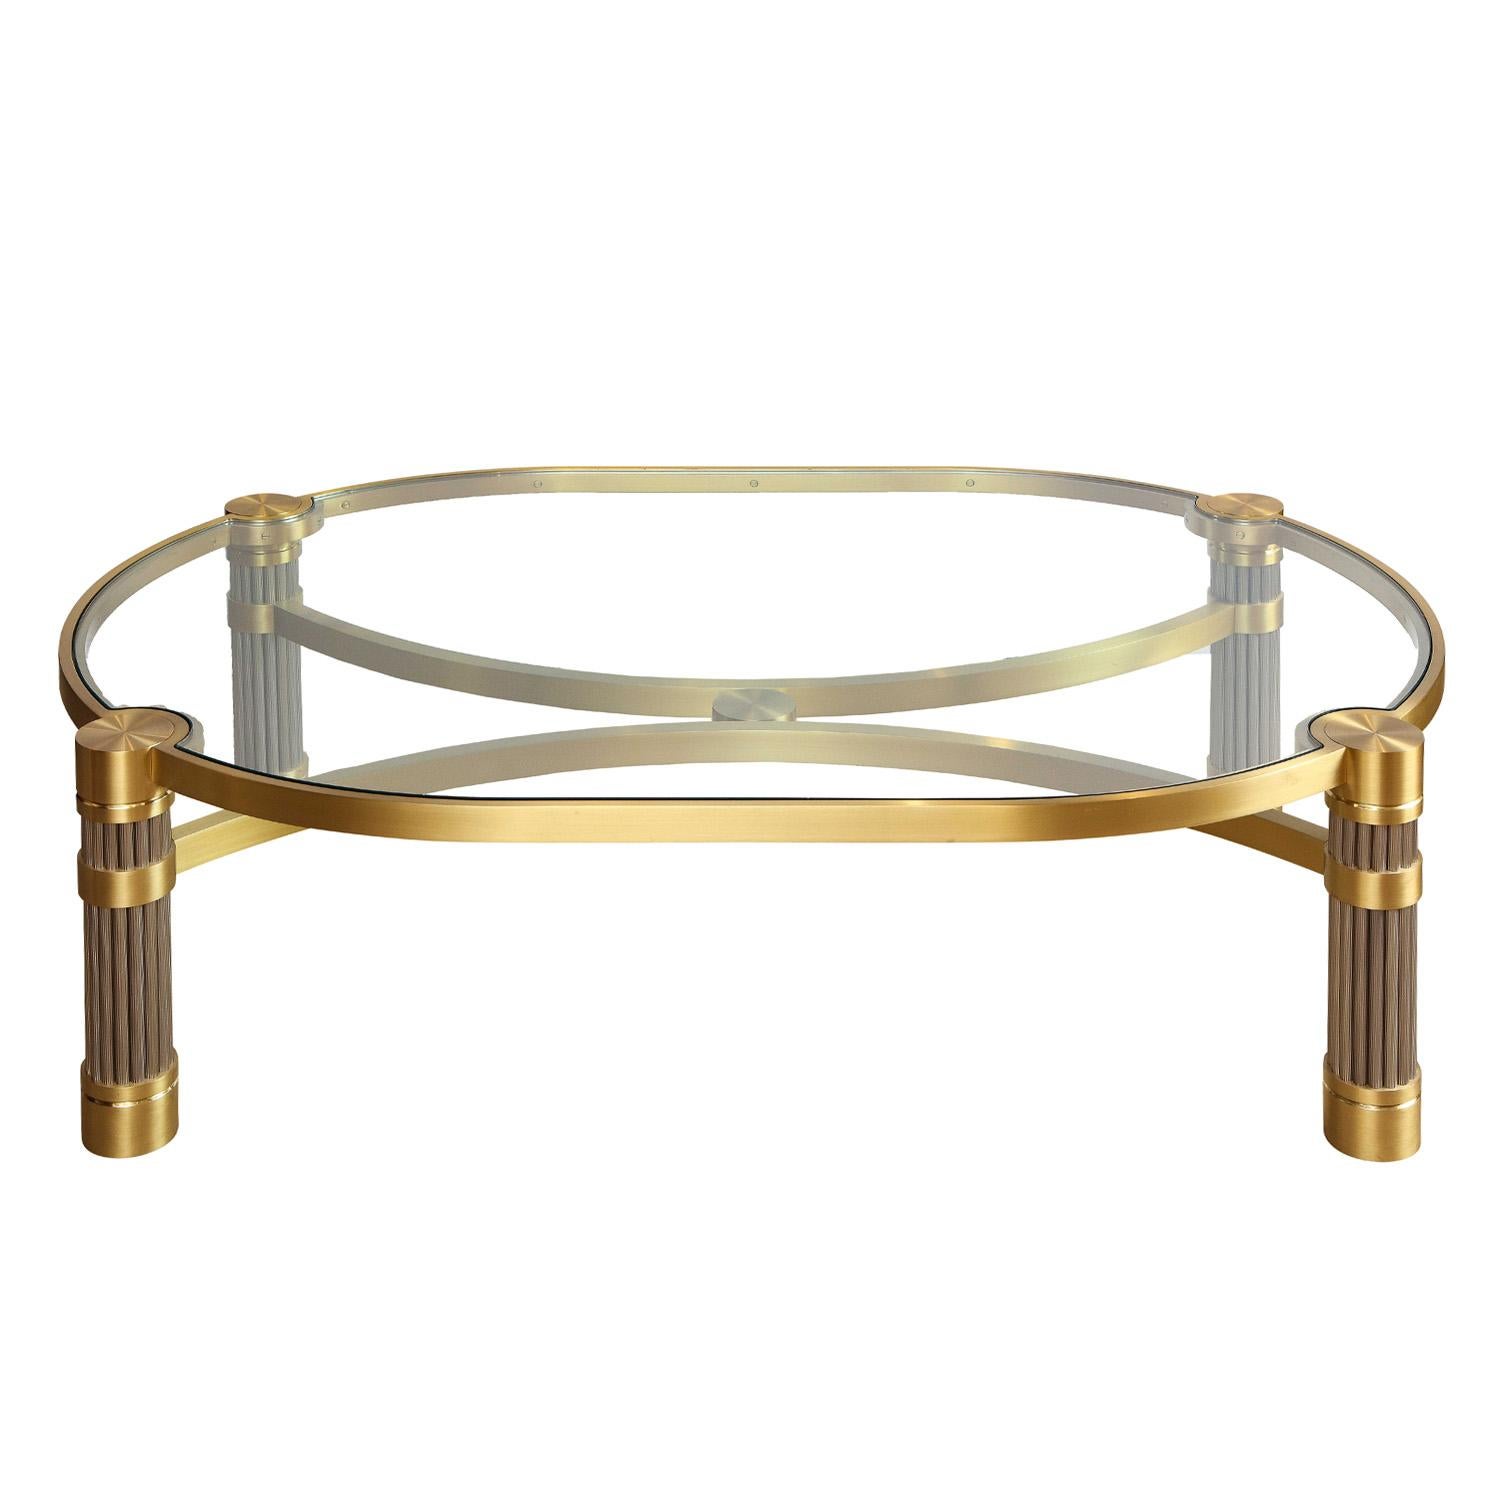 Meticulously crafted large coffee table in brushed stainless steel and gold tinted brass with inset glass top by Ron Seff, American 1980's.  Ron Seff was an acolyte of Karl Springer.  This coffee table is very refined and crafted to the highest